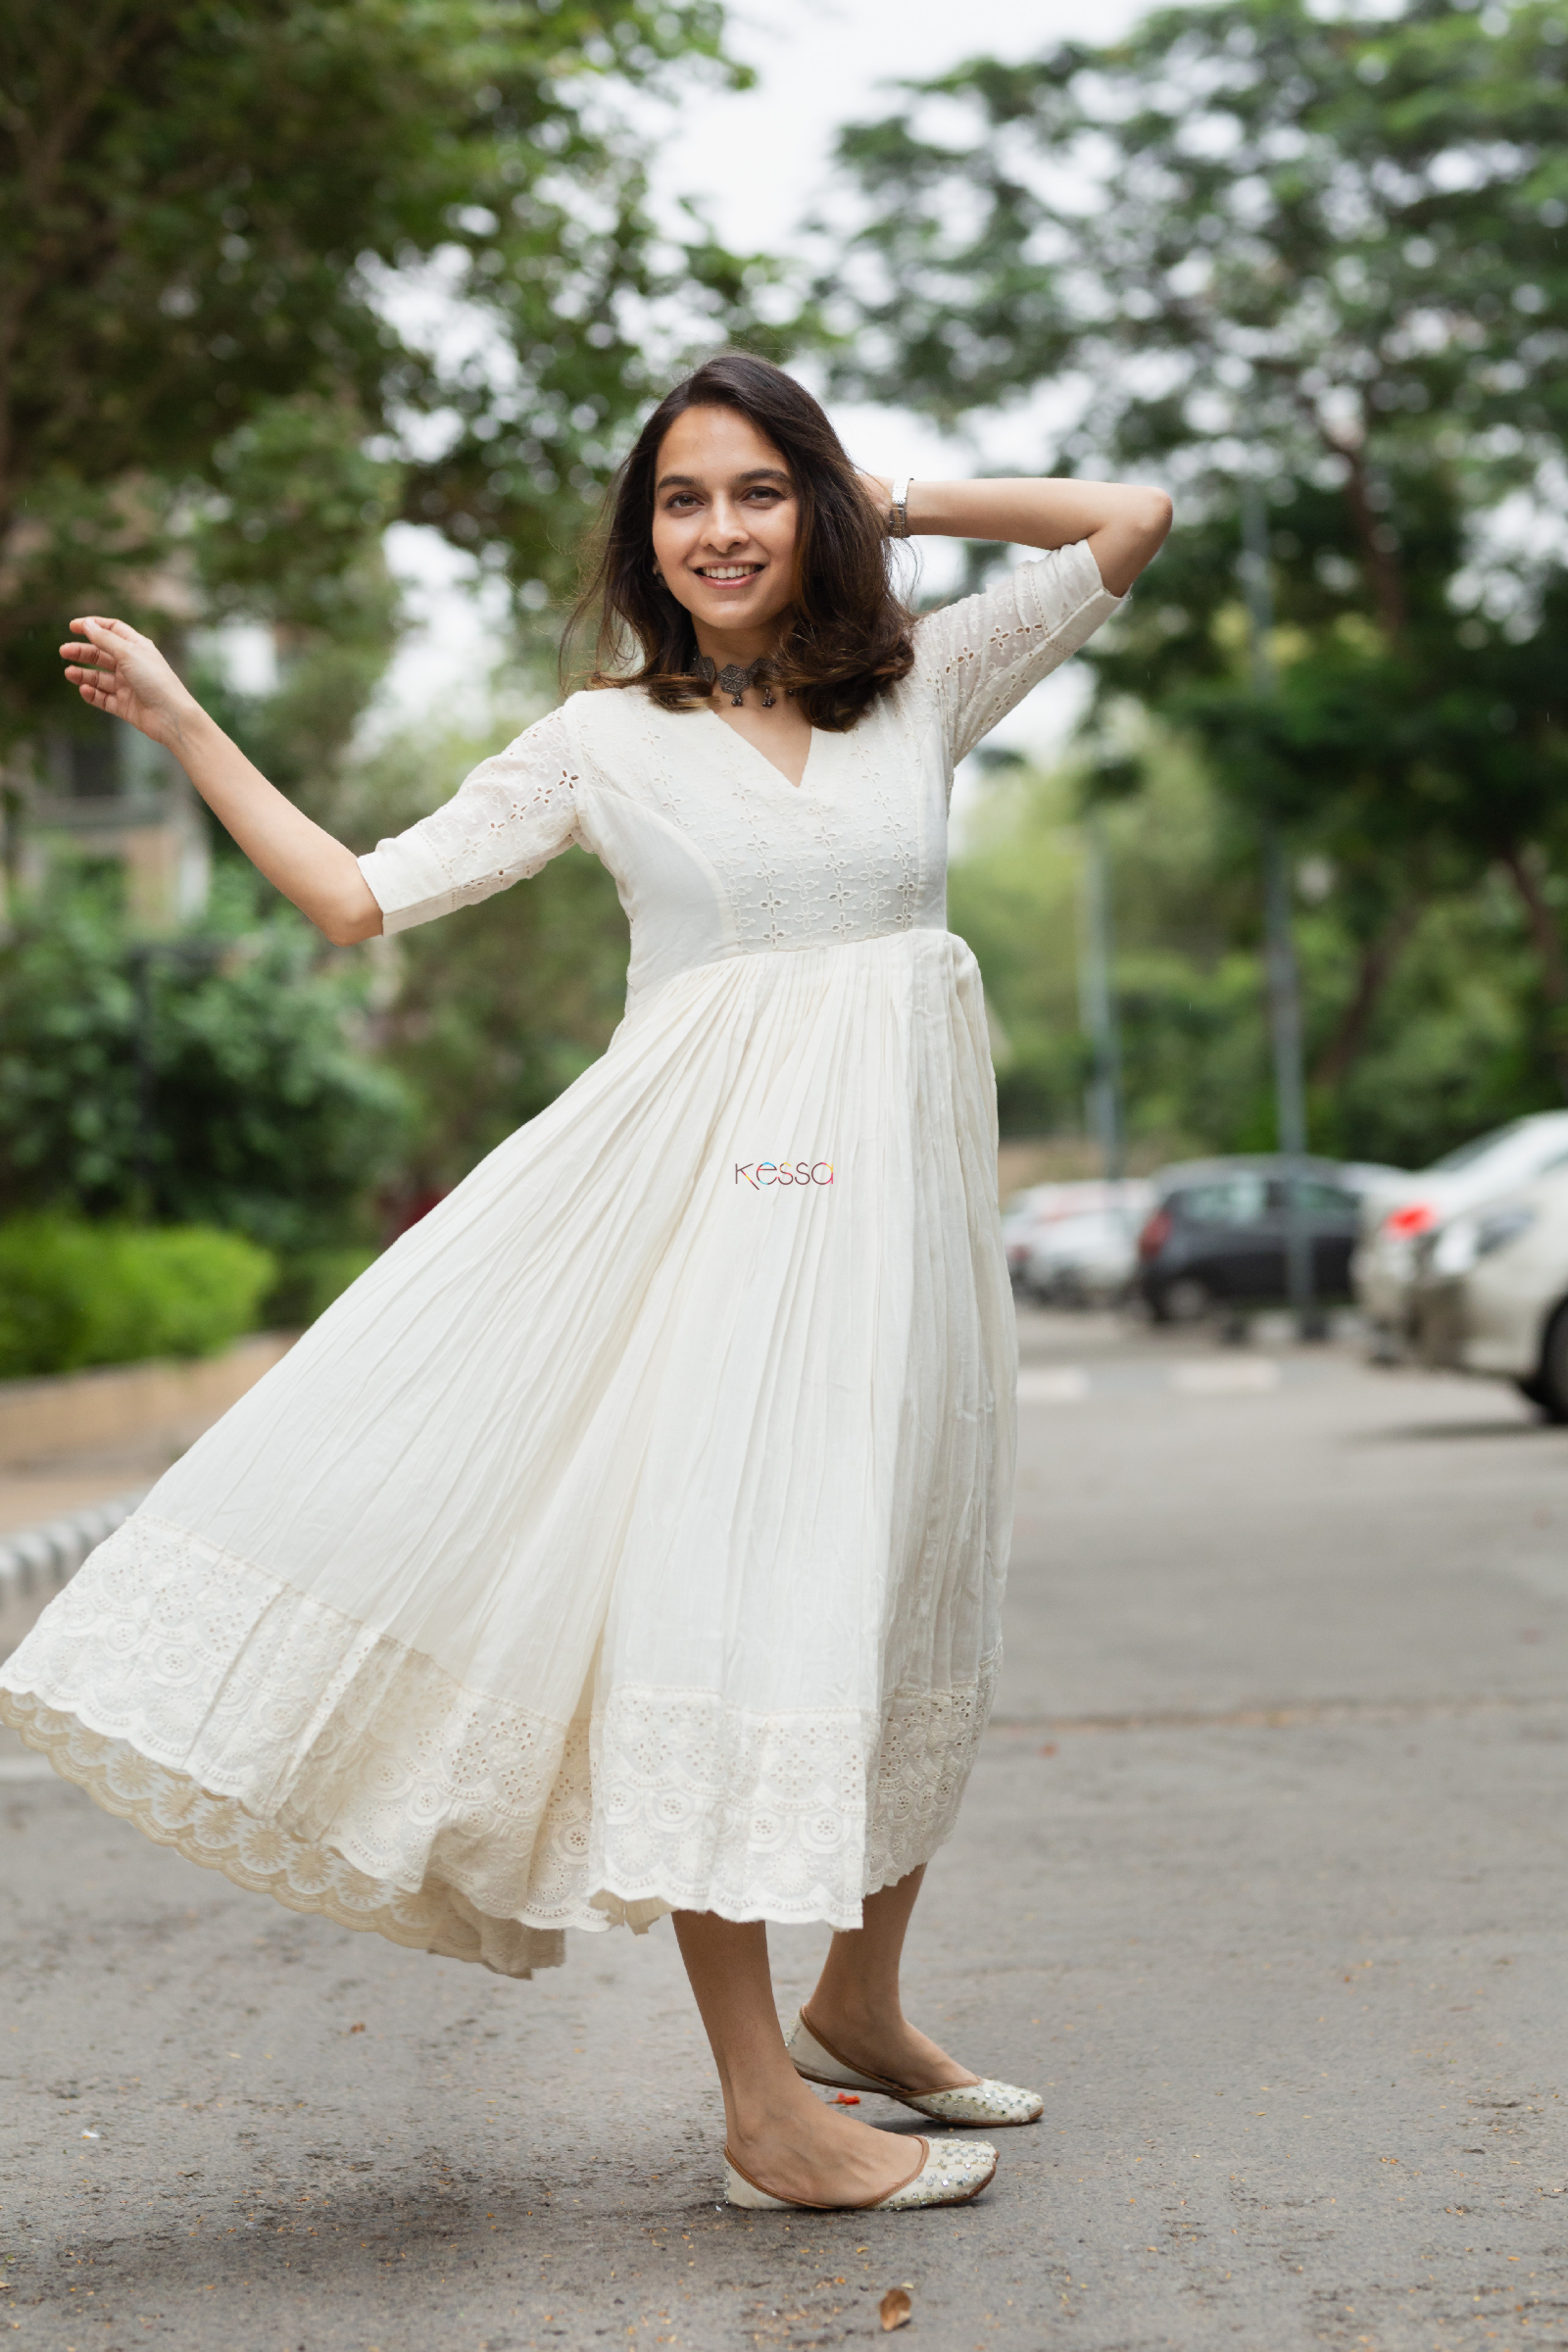 HOW TO STYLE A WHITE KURTI AS A DRESS